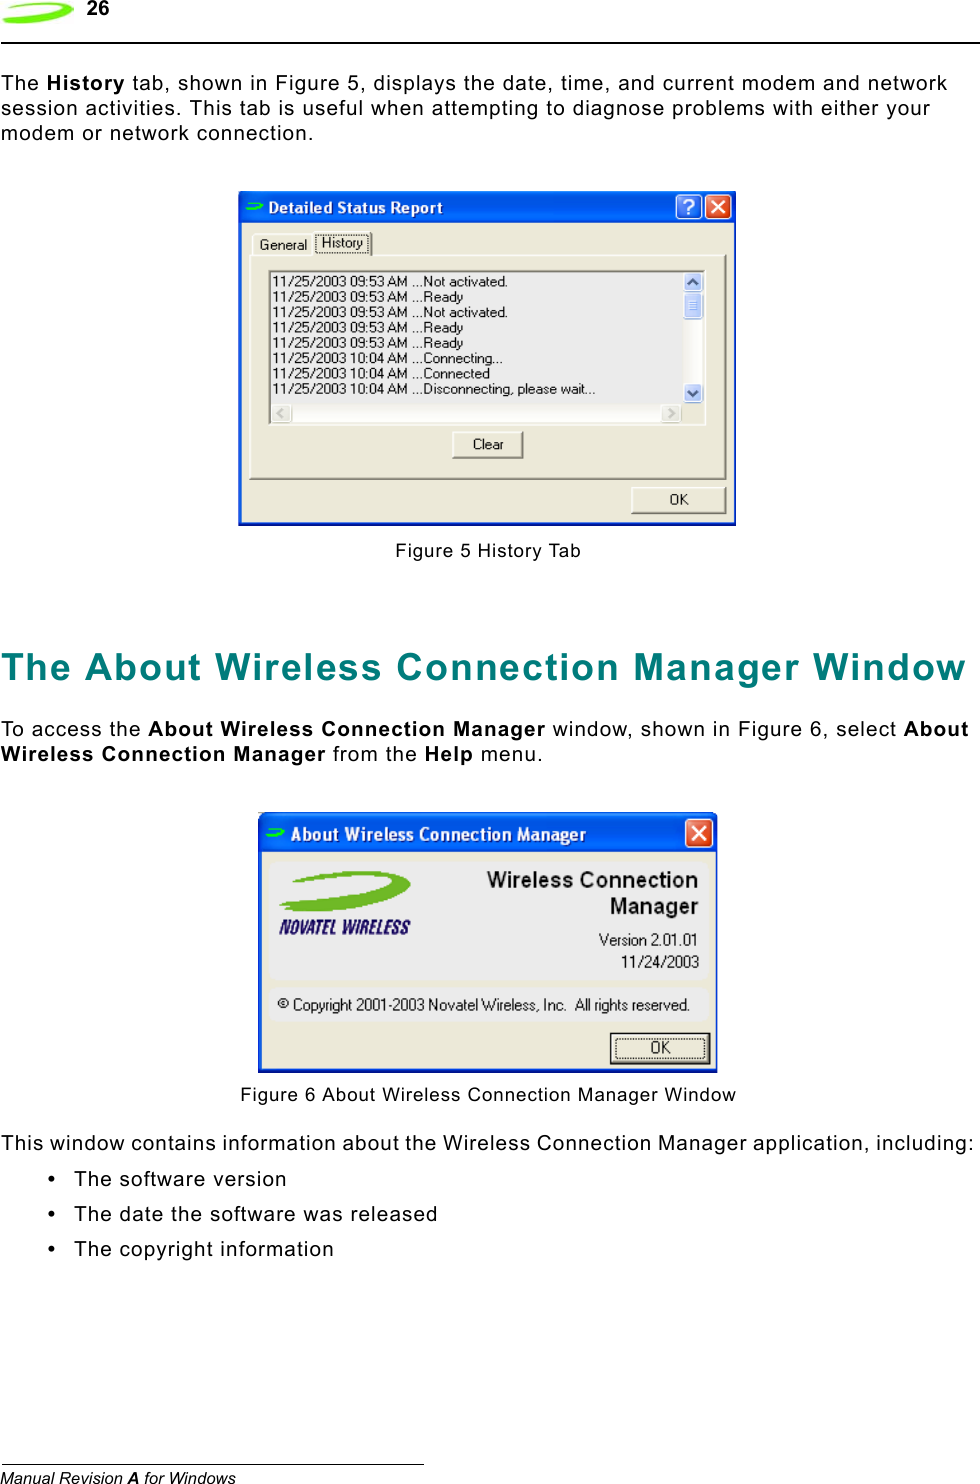 26   Manual Revision A for WindowsThe History tab, shown in Figure 5, displays the date, time, and current modem and network session activities. This tab is useful when attempting to diagnose problems with either your modem or network connection.Figure 5 History TabThe About Wireless Connection Manager WindowTo access the About Wireless Connection Manager window, shown in Figure 6, select About Wireless Connection Manager from the Help menu.Figure 6 About Wireless Connection Manager WindowThis window contains information about the Wireless Connection Manager application, including:•The software version•The date the software was released•The copyright information